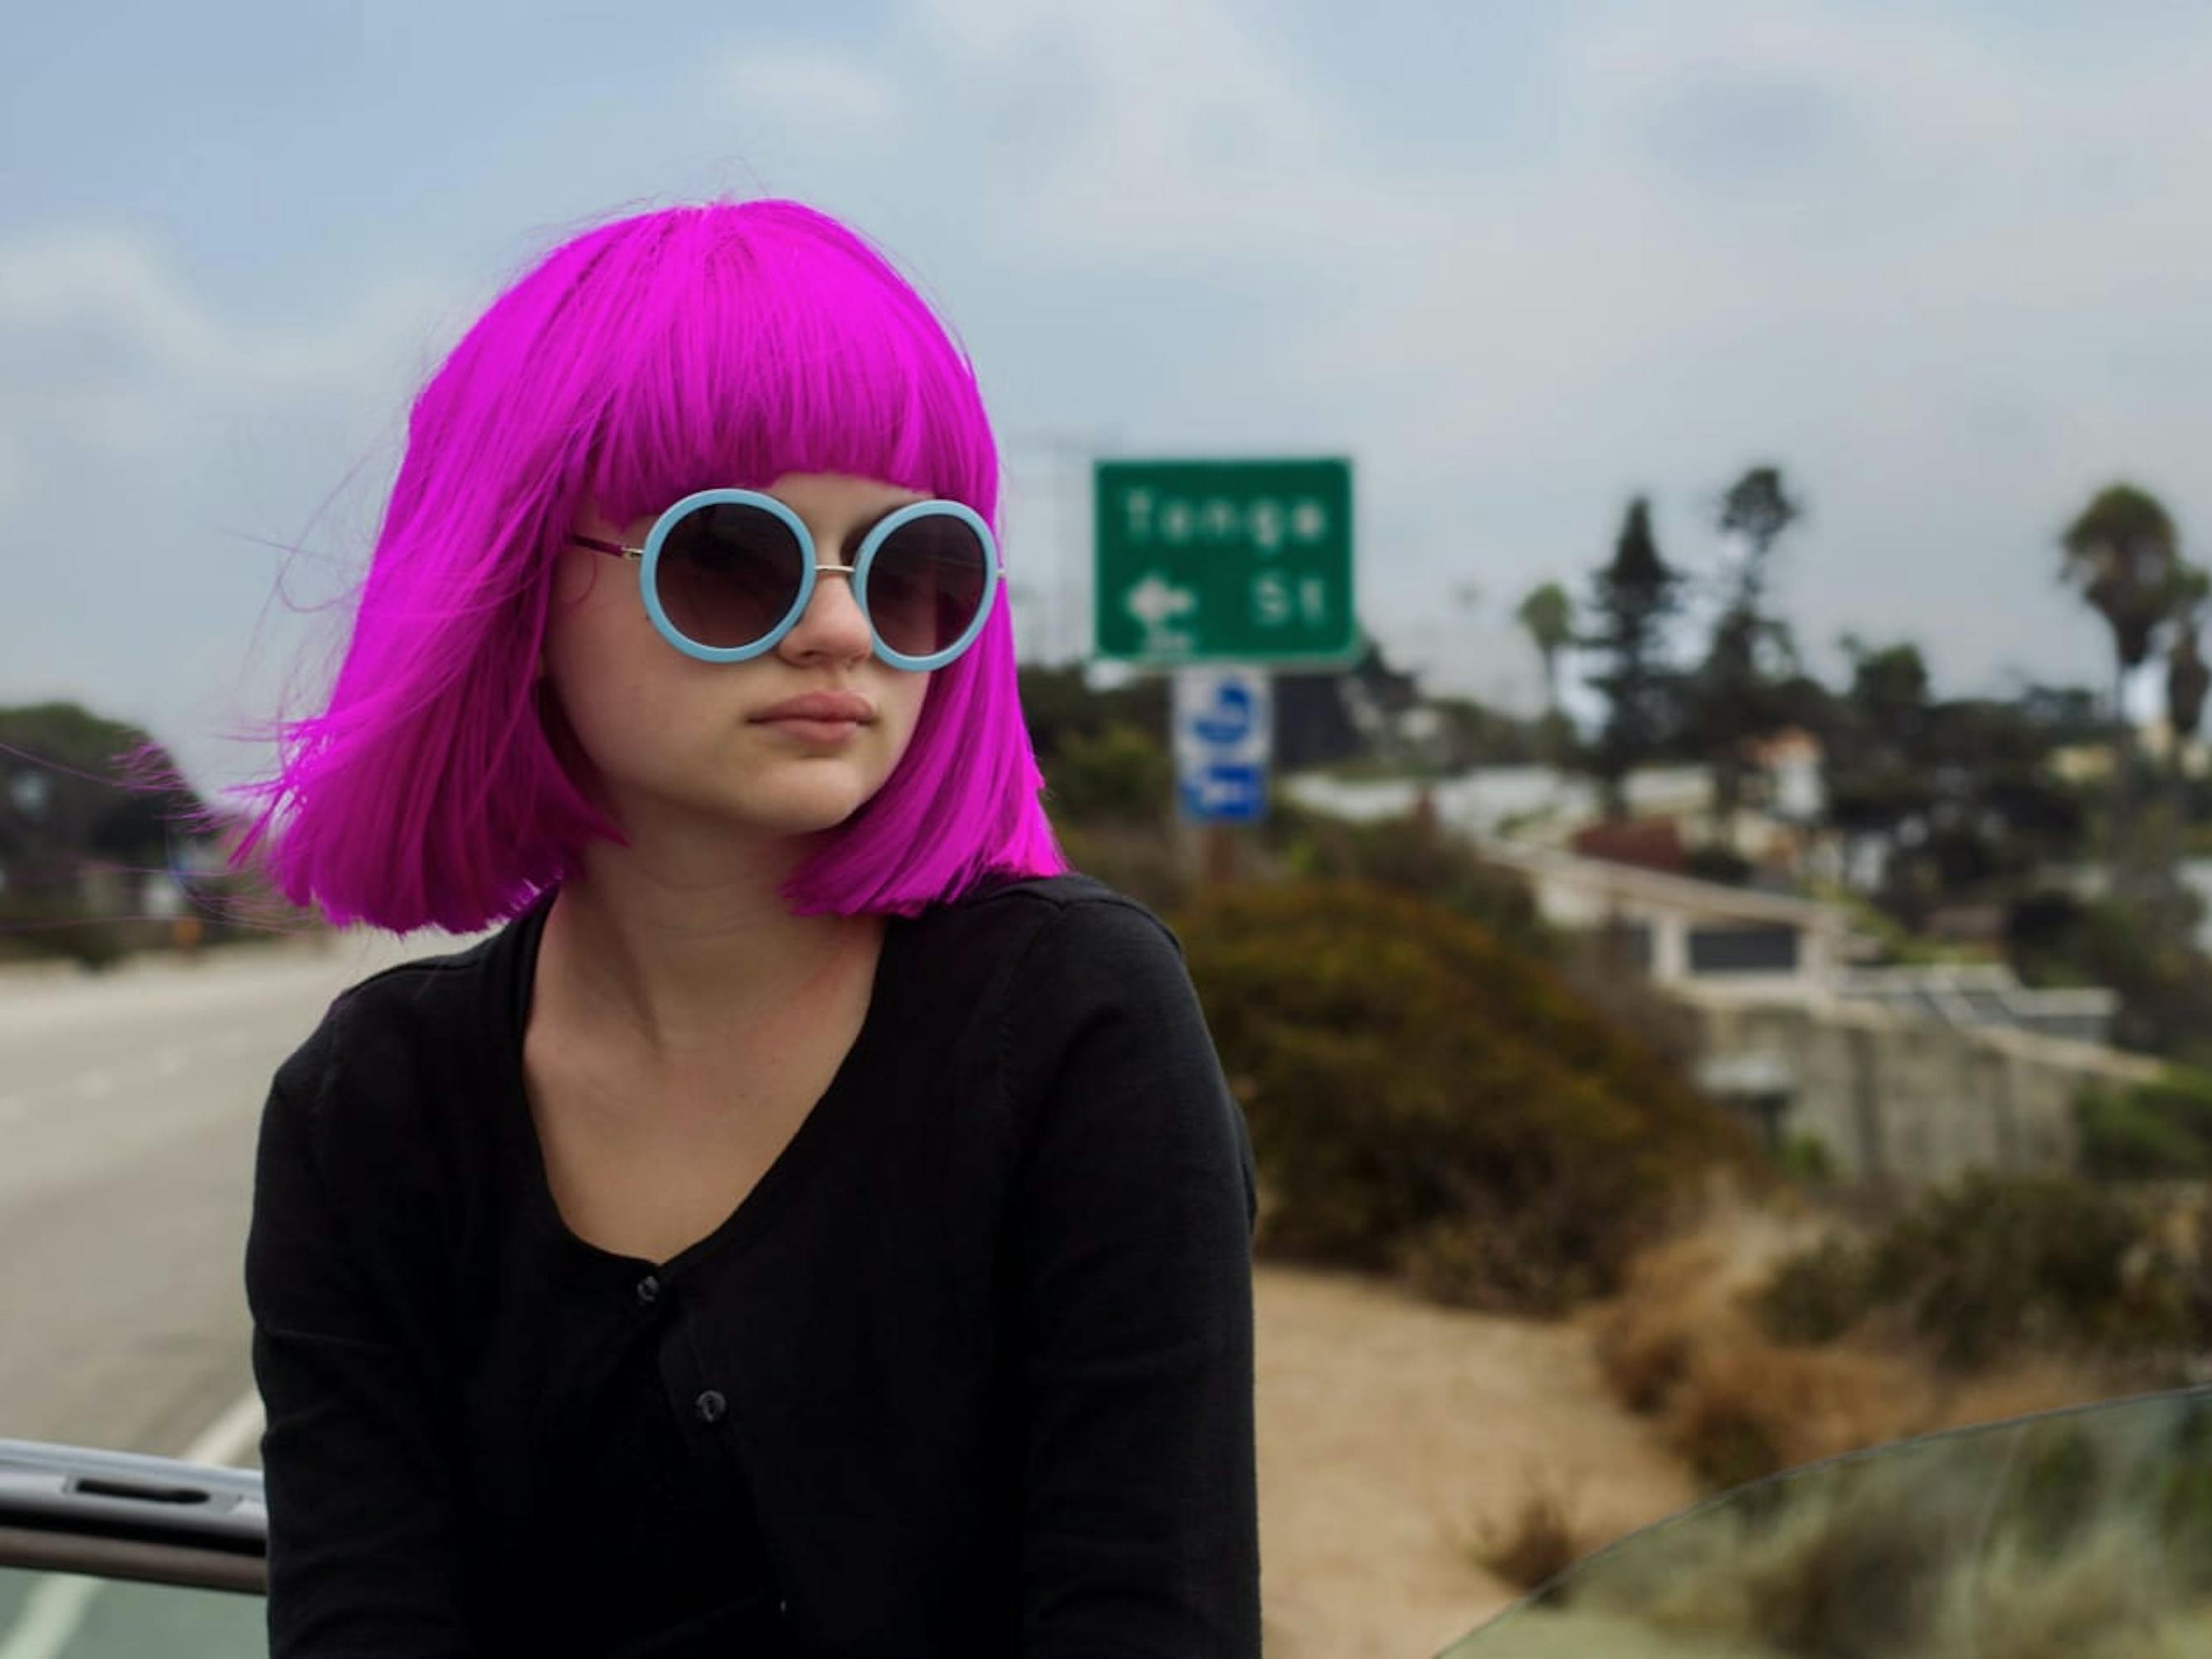 Grace Bloom (Joey King) in Wish I Was Here (2014) wears a pink bob, circular glasses, and a black top. In the background is a green road sign and trees.